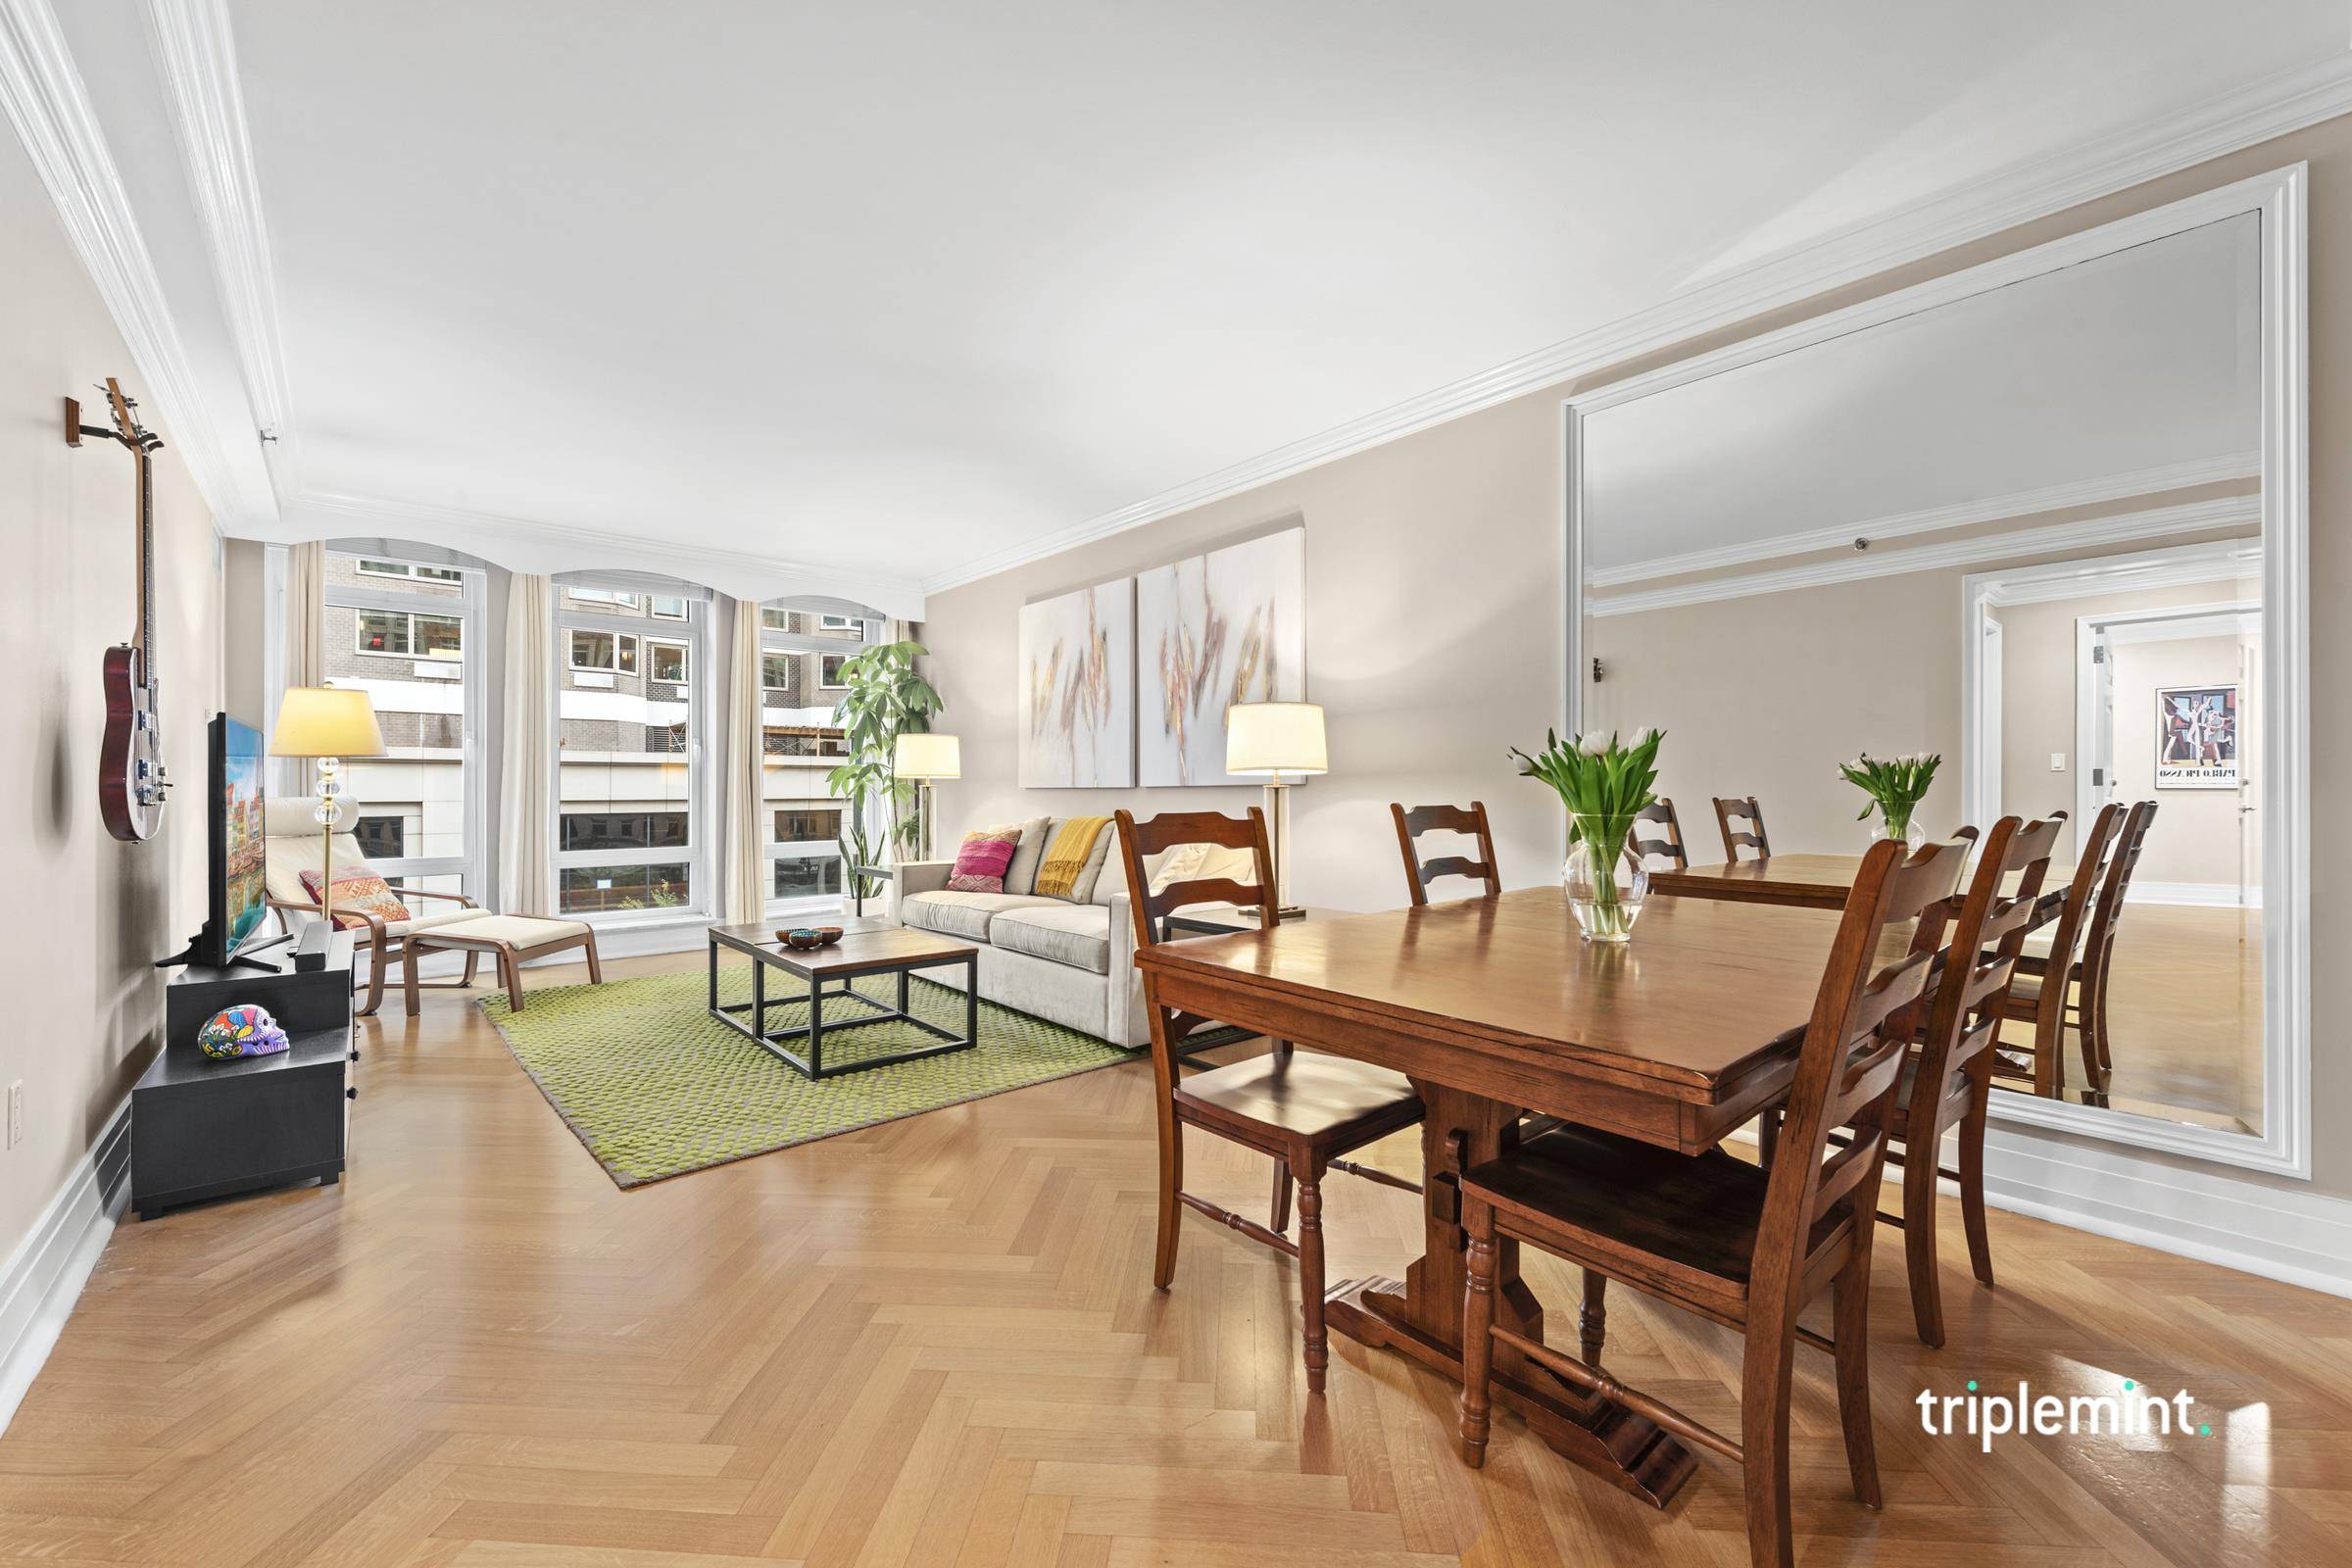 The Brompton, one of Upper East Side's most sought after condominiums, offers a gorgeous new two bedroom to purchase.